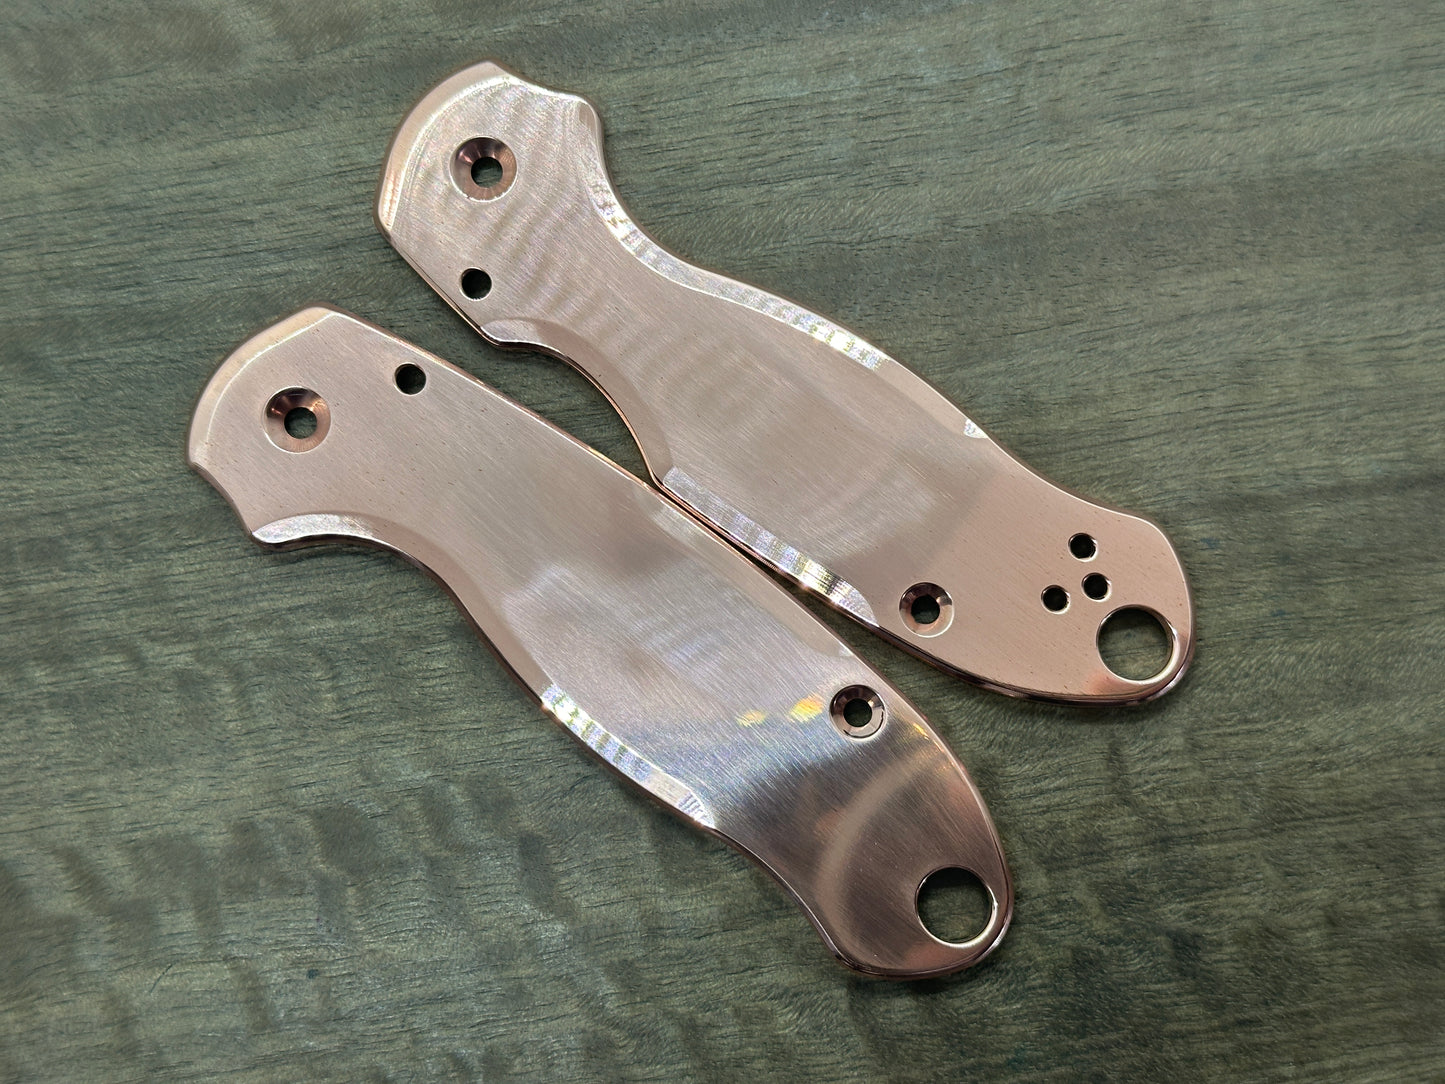 POLISHED Copper Scales for Spyderco Para 3